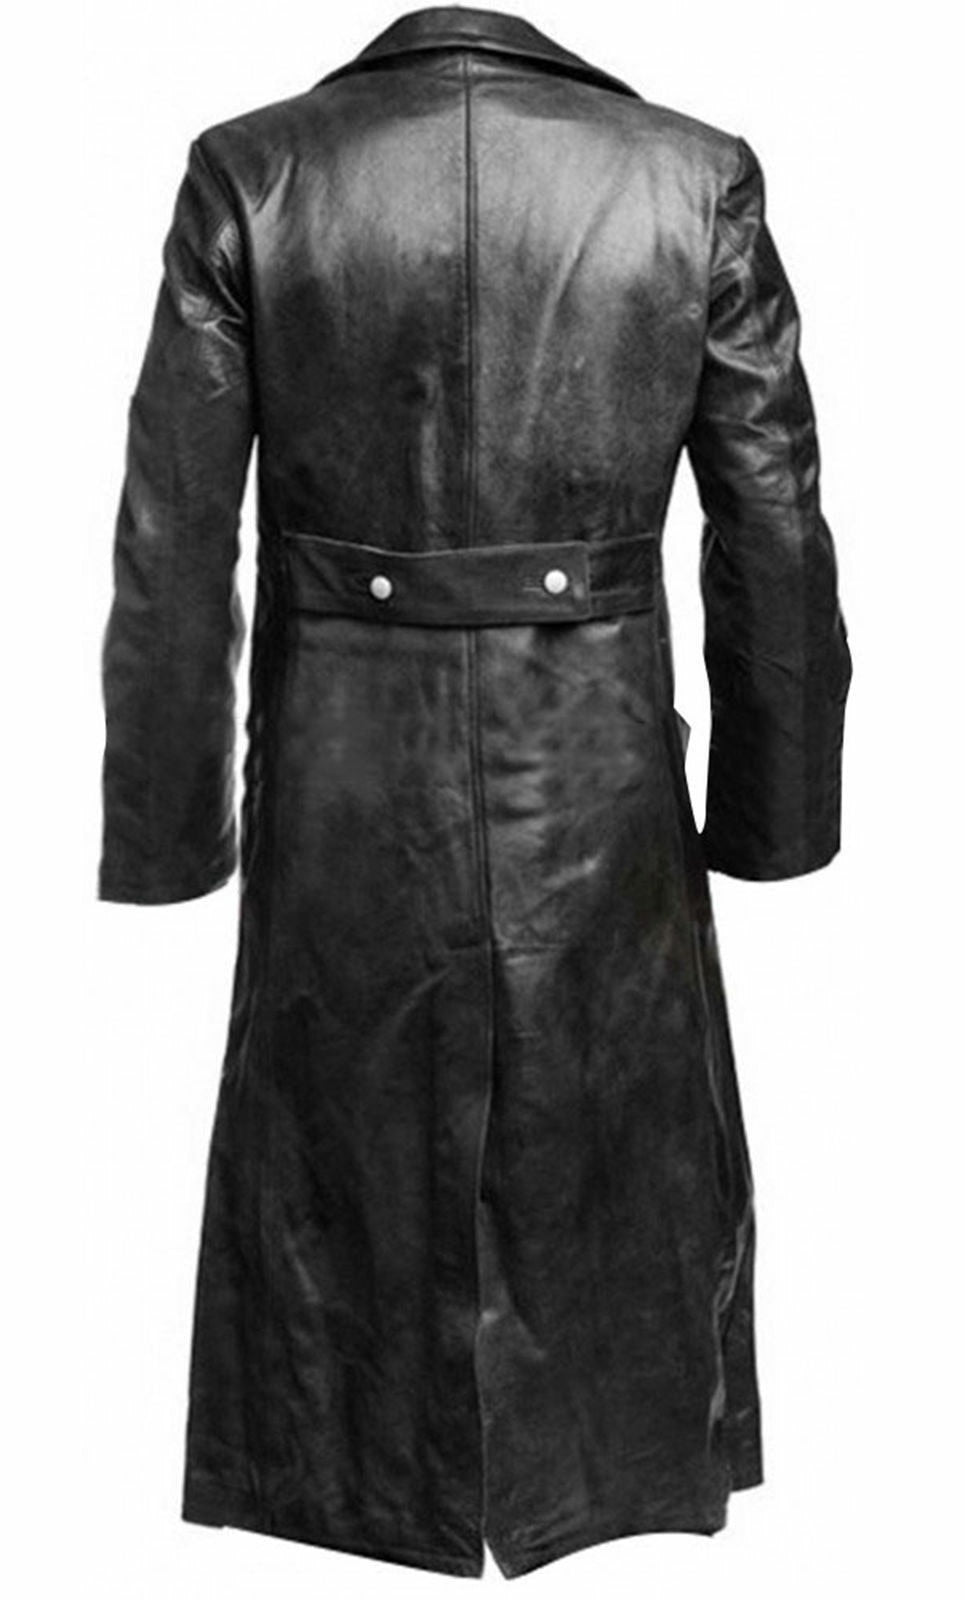 MEN&#39;S GERMAN CLASSIC WW2 WWII MILITARY UNIFORM OFFICER BLACK REAL LEATHER TRENCH COAT